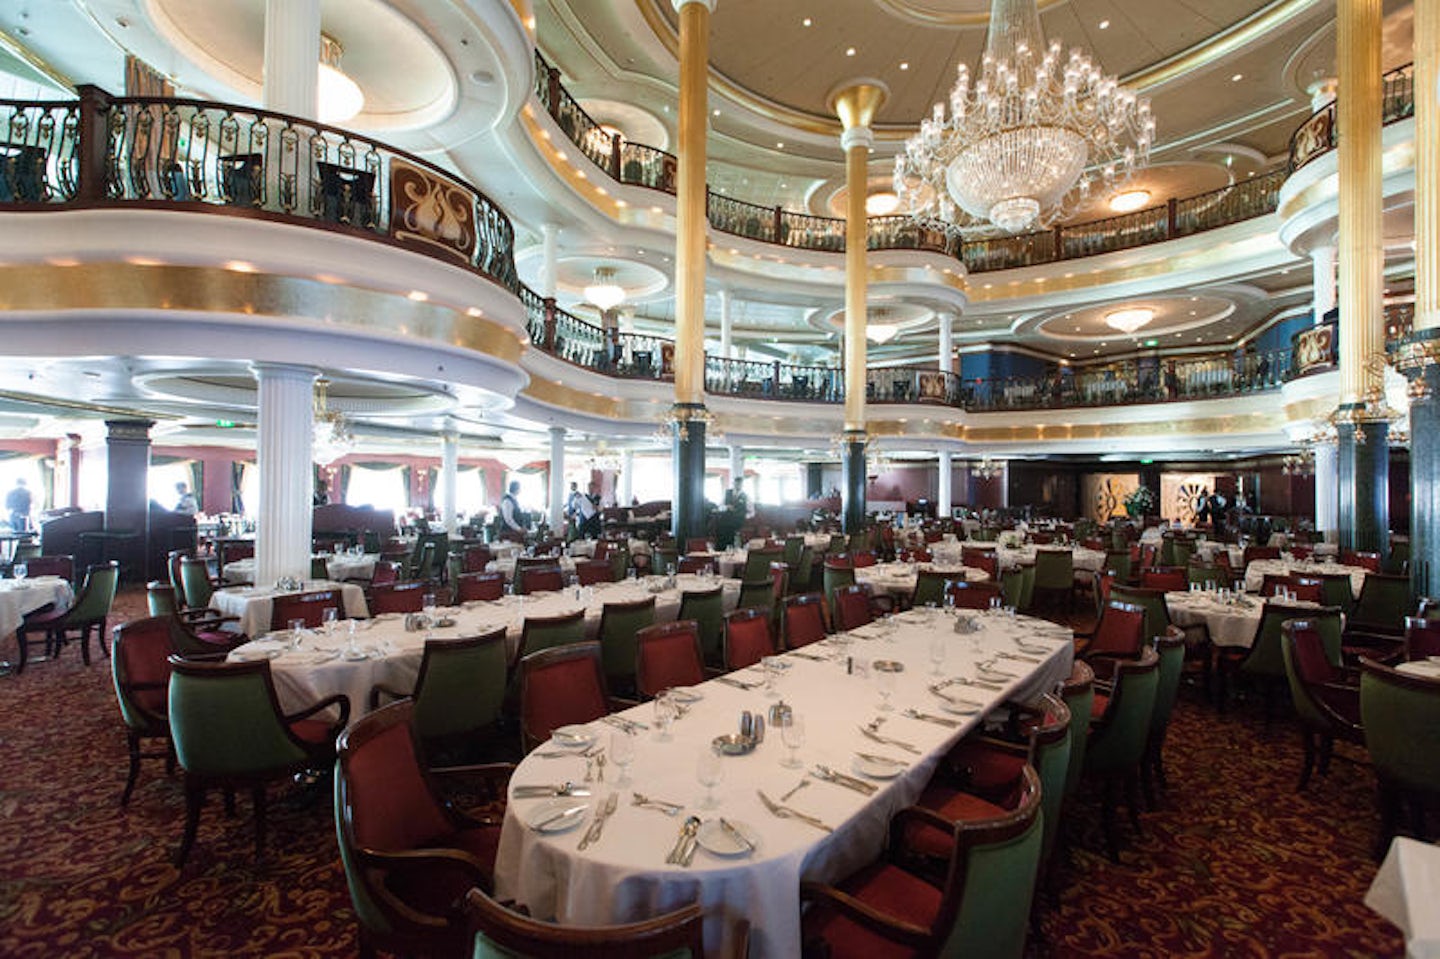 Romeo & Juliet Dining Room on Independence of the Seas